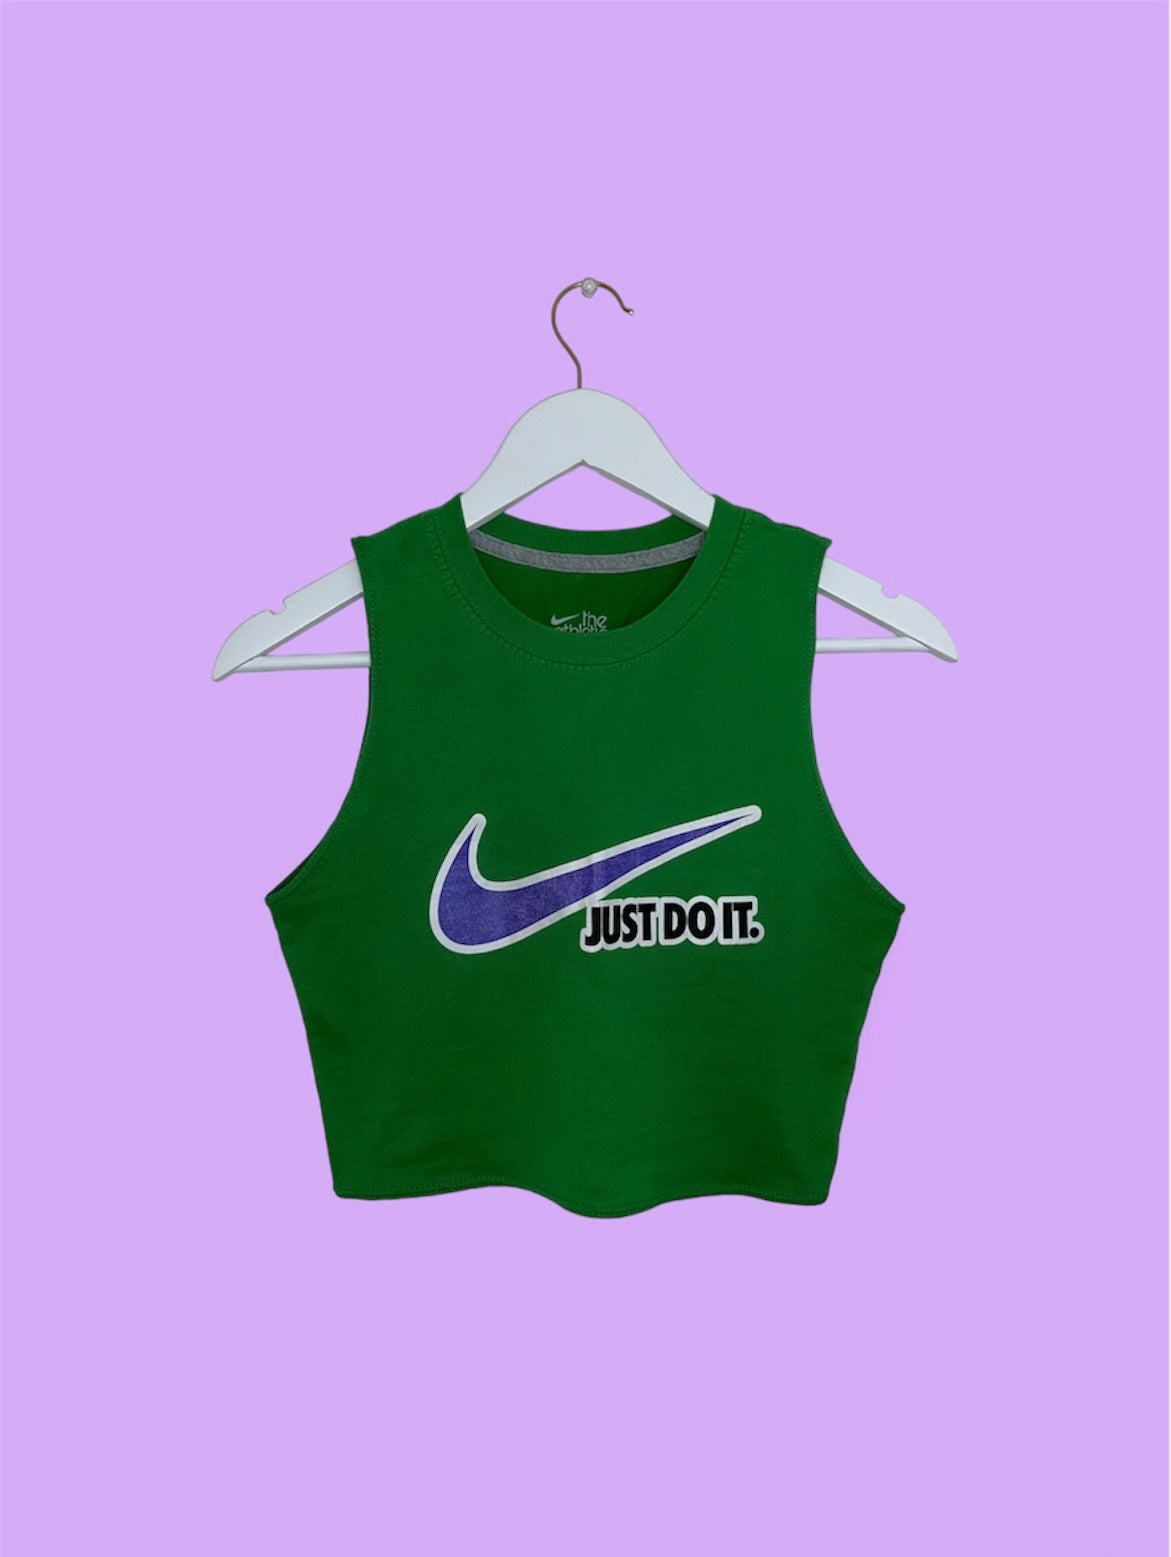 green sleeveless crop top with white and blue nike logo shown on a lilac background